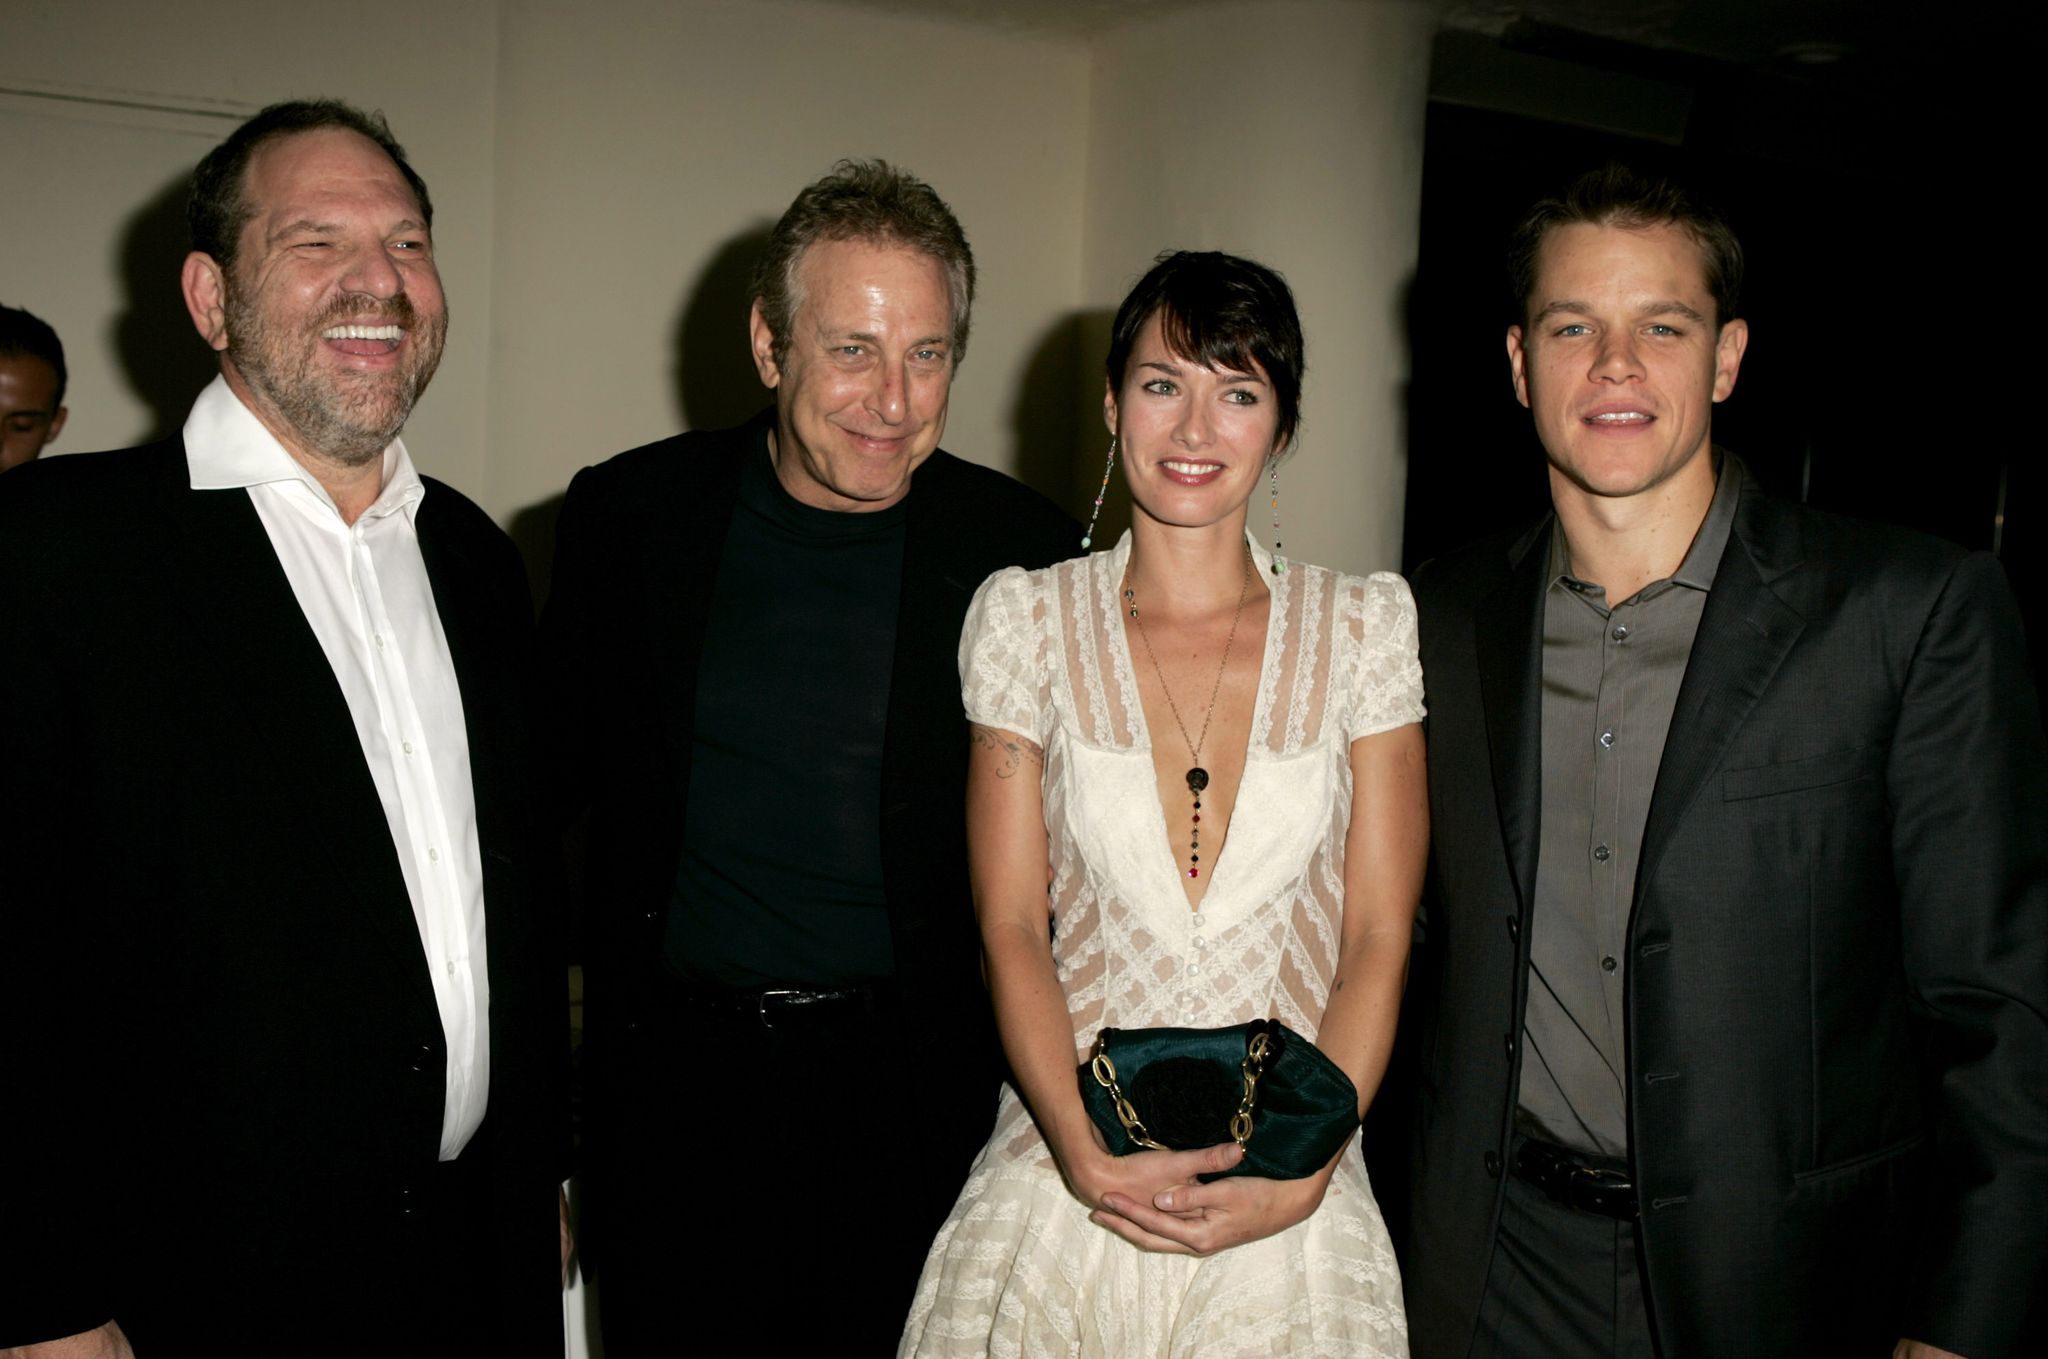 Harvey Weinstein and Lena Headey at the premiere of The Brothers Grimm